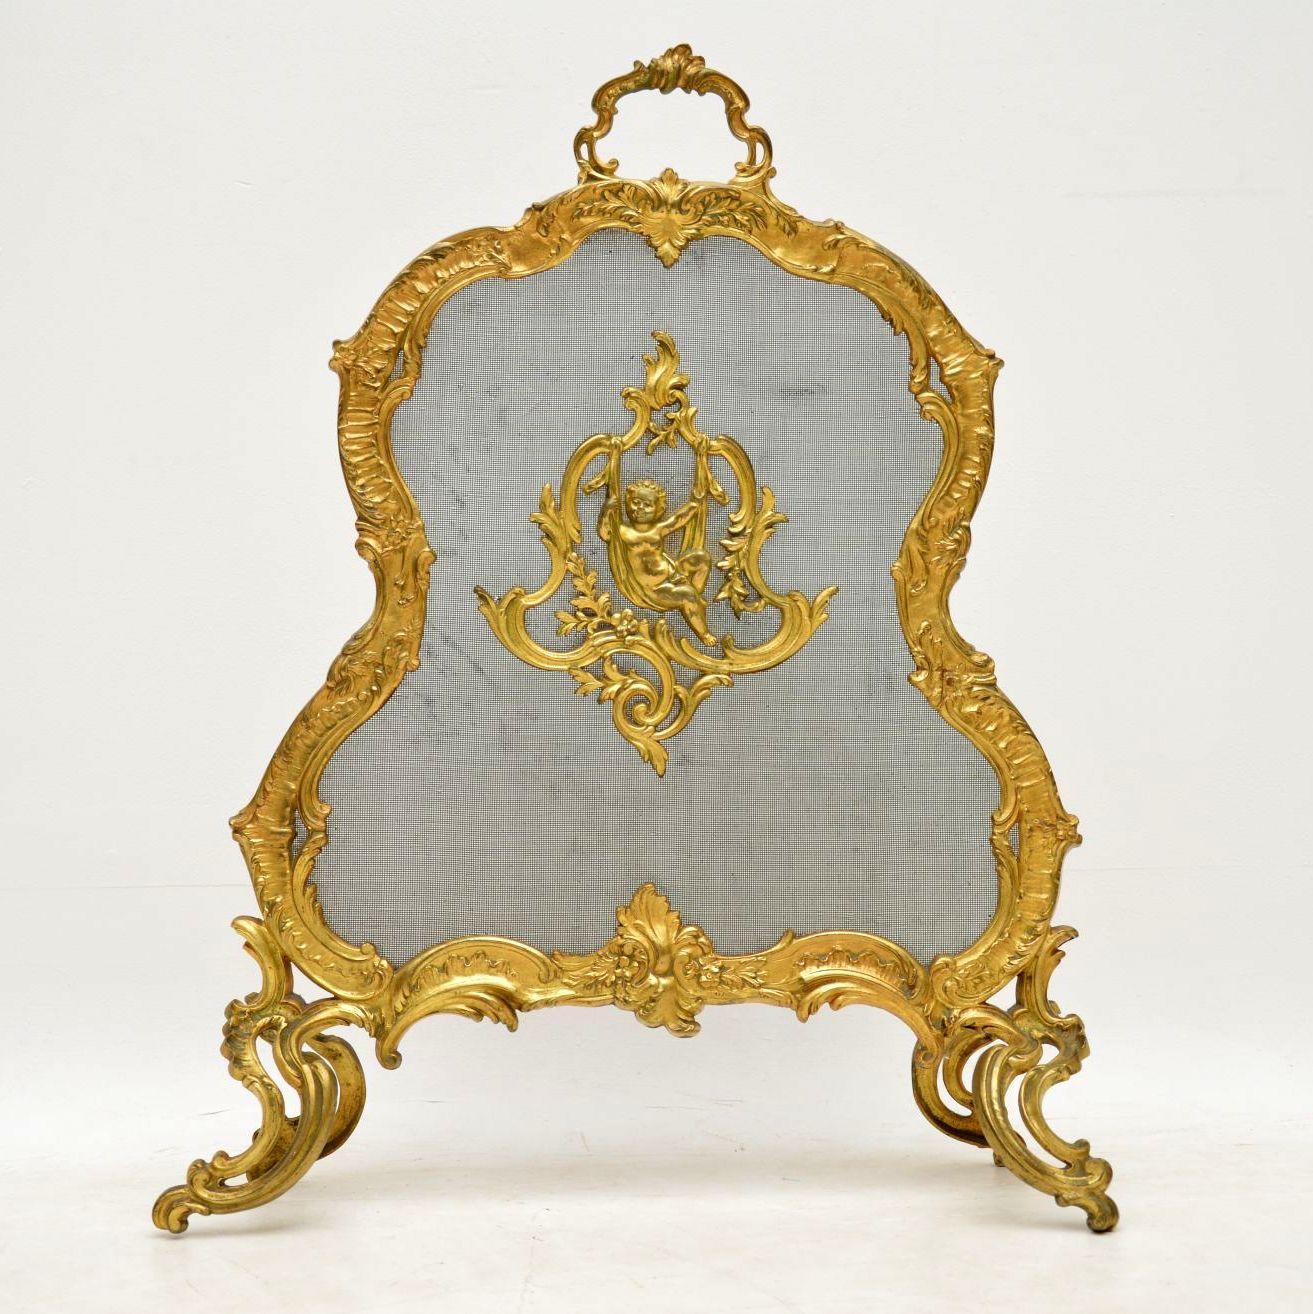 Antique French gilt bronze highly ornate and decorative fire screen in the Rococo style, with a playful cherub fixed in the middle on a wire mesh background. This piece has a lot of detailed castings and embellishments. It’s in good condition and